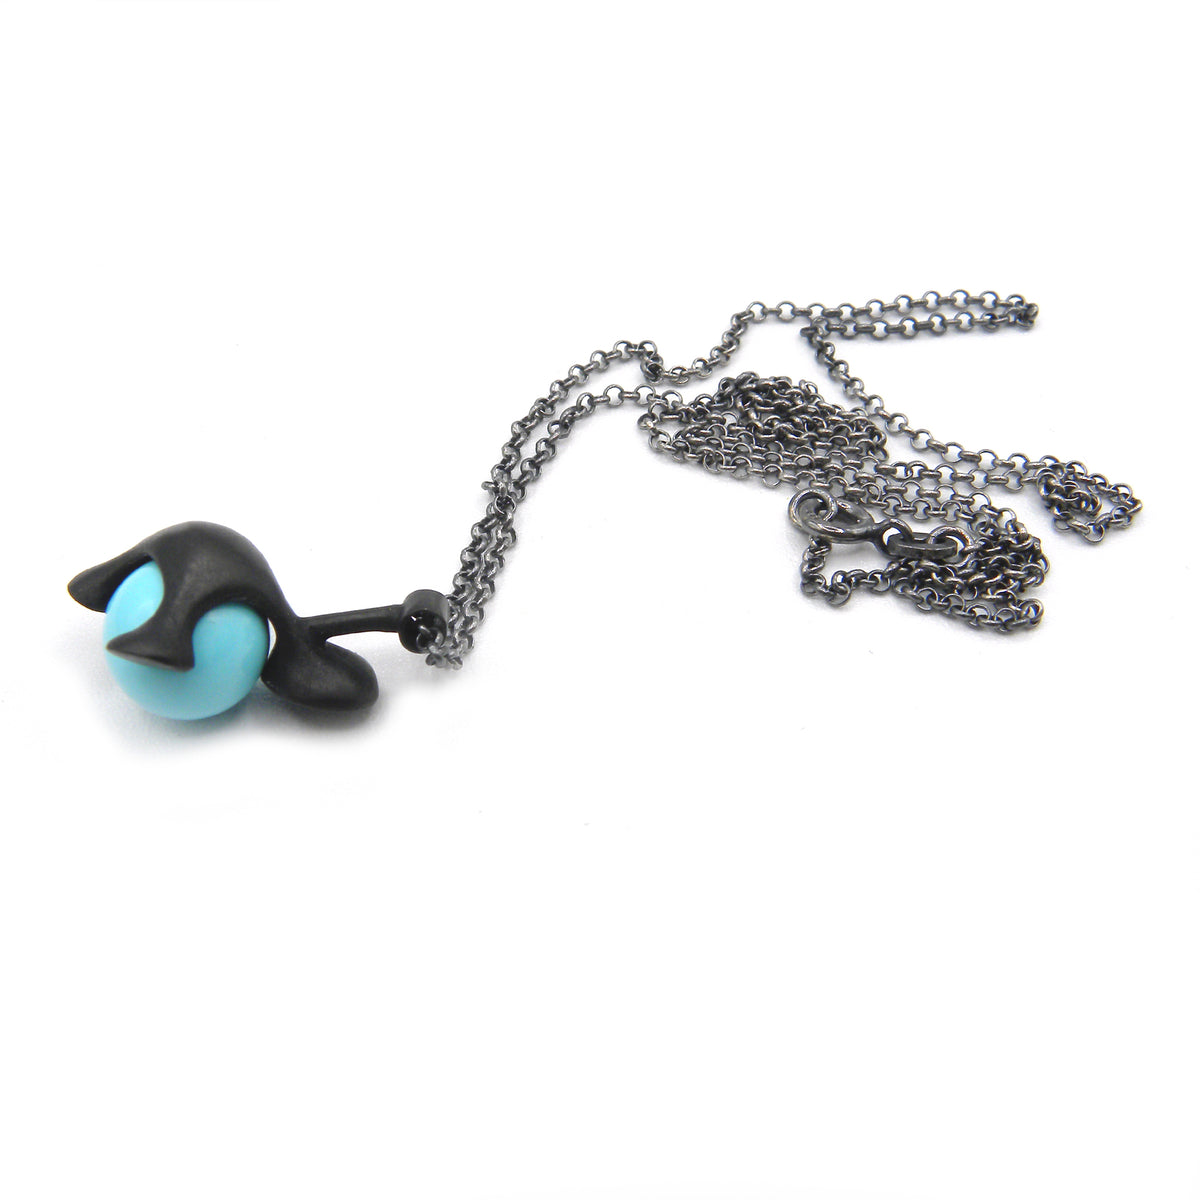 Turquoise Snorky pendant with black patina